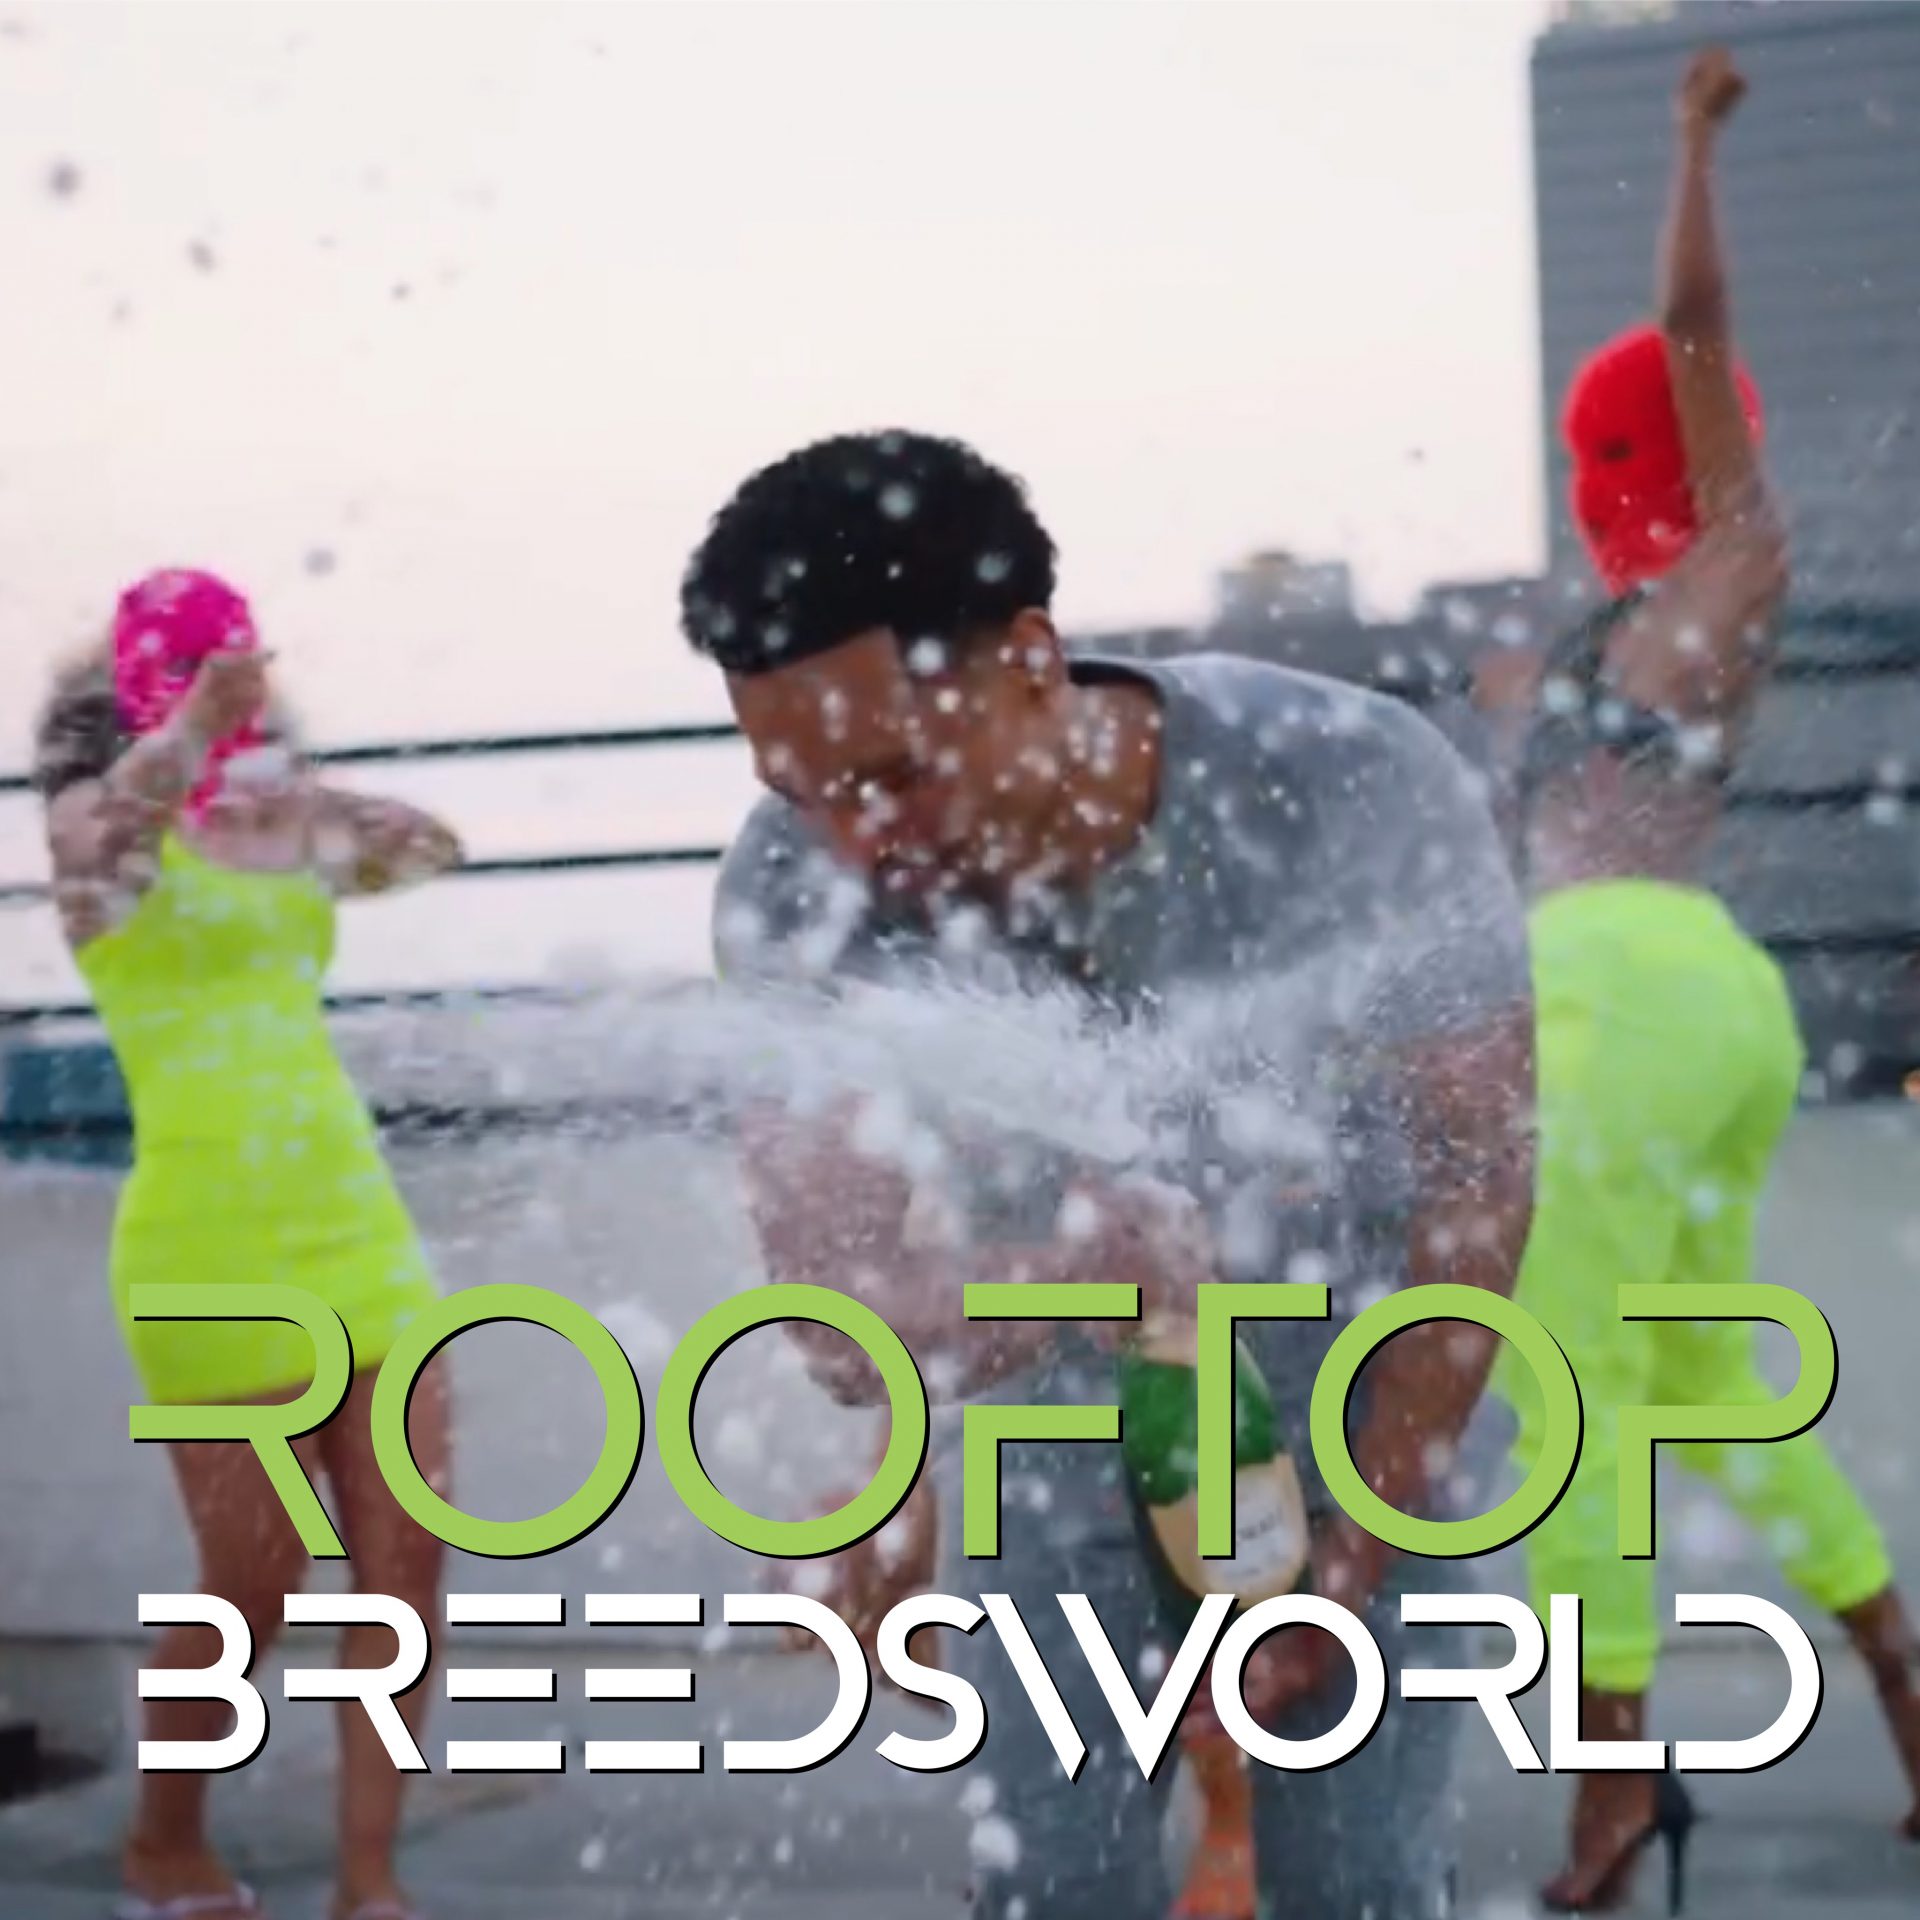 Oakland basically based artist Breedsworld drops new single “Rooftop” after closing year’s hit “Highlight”